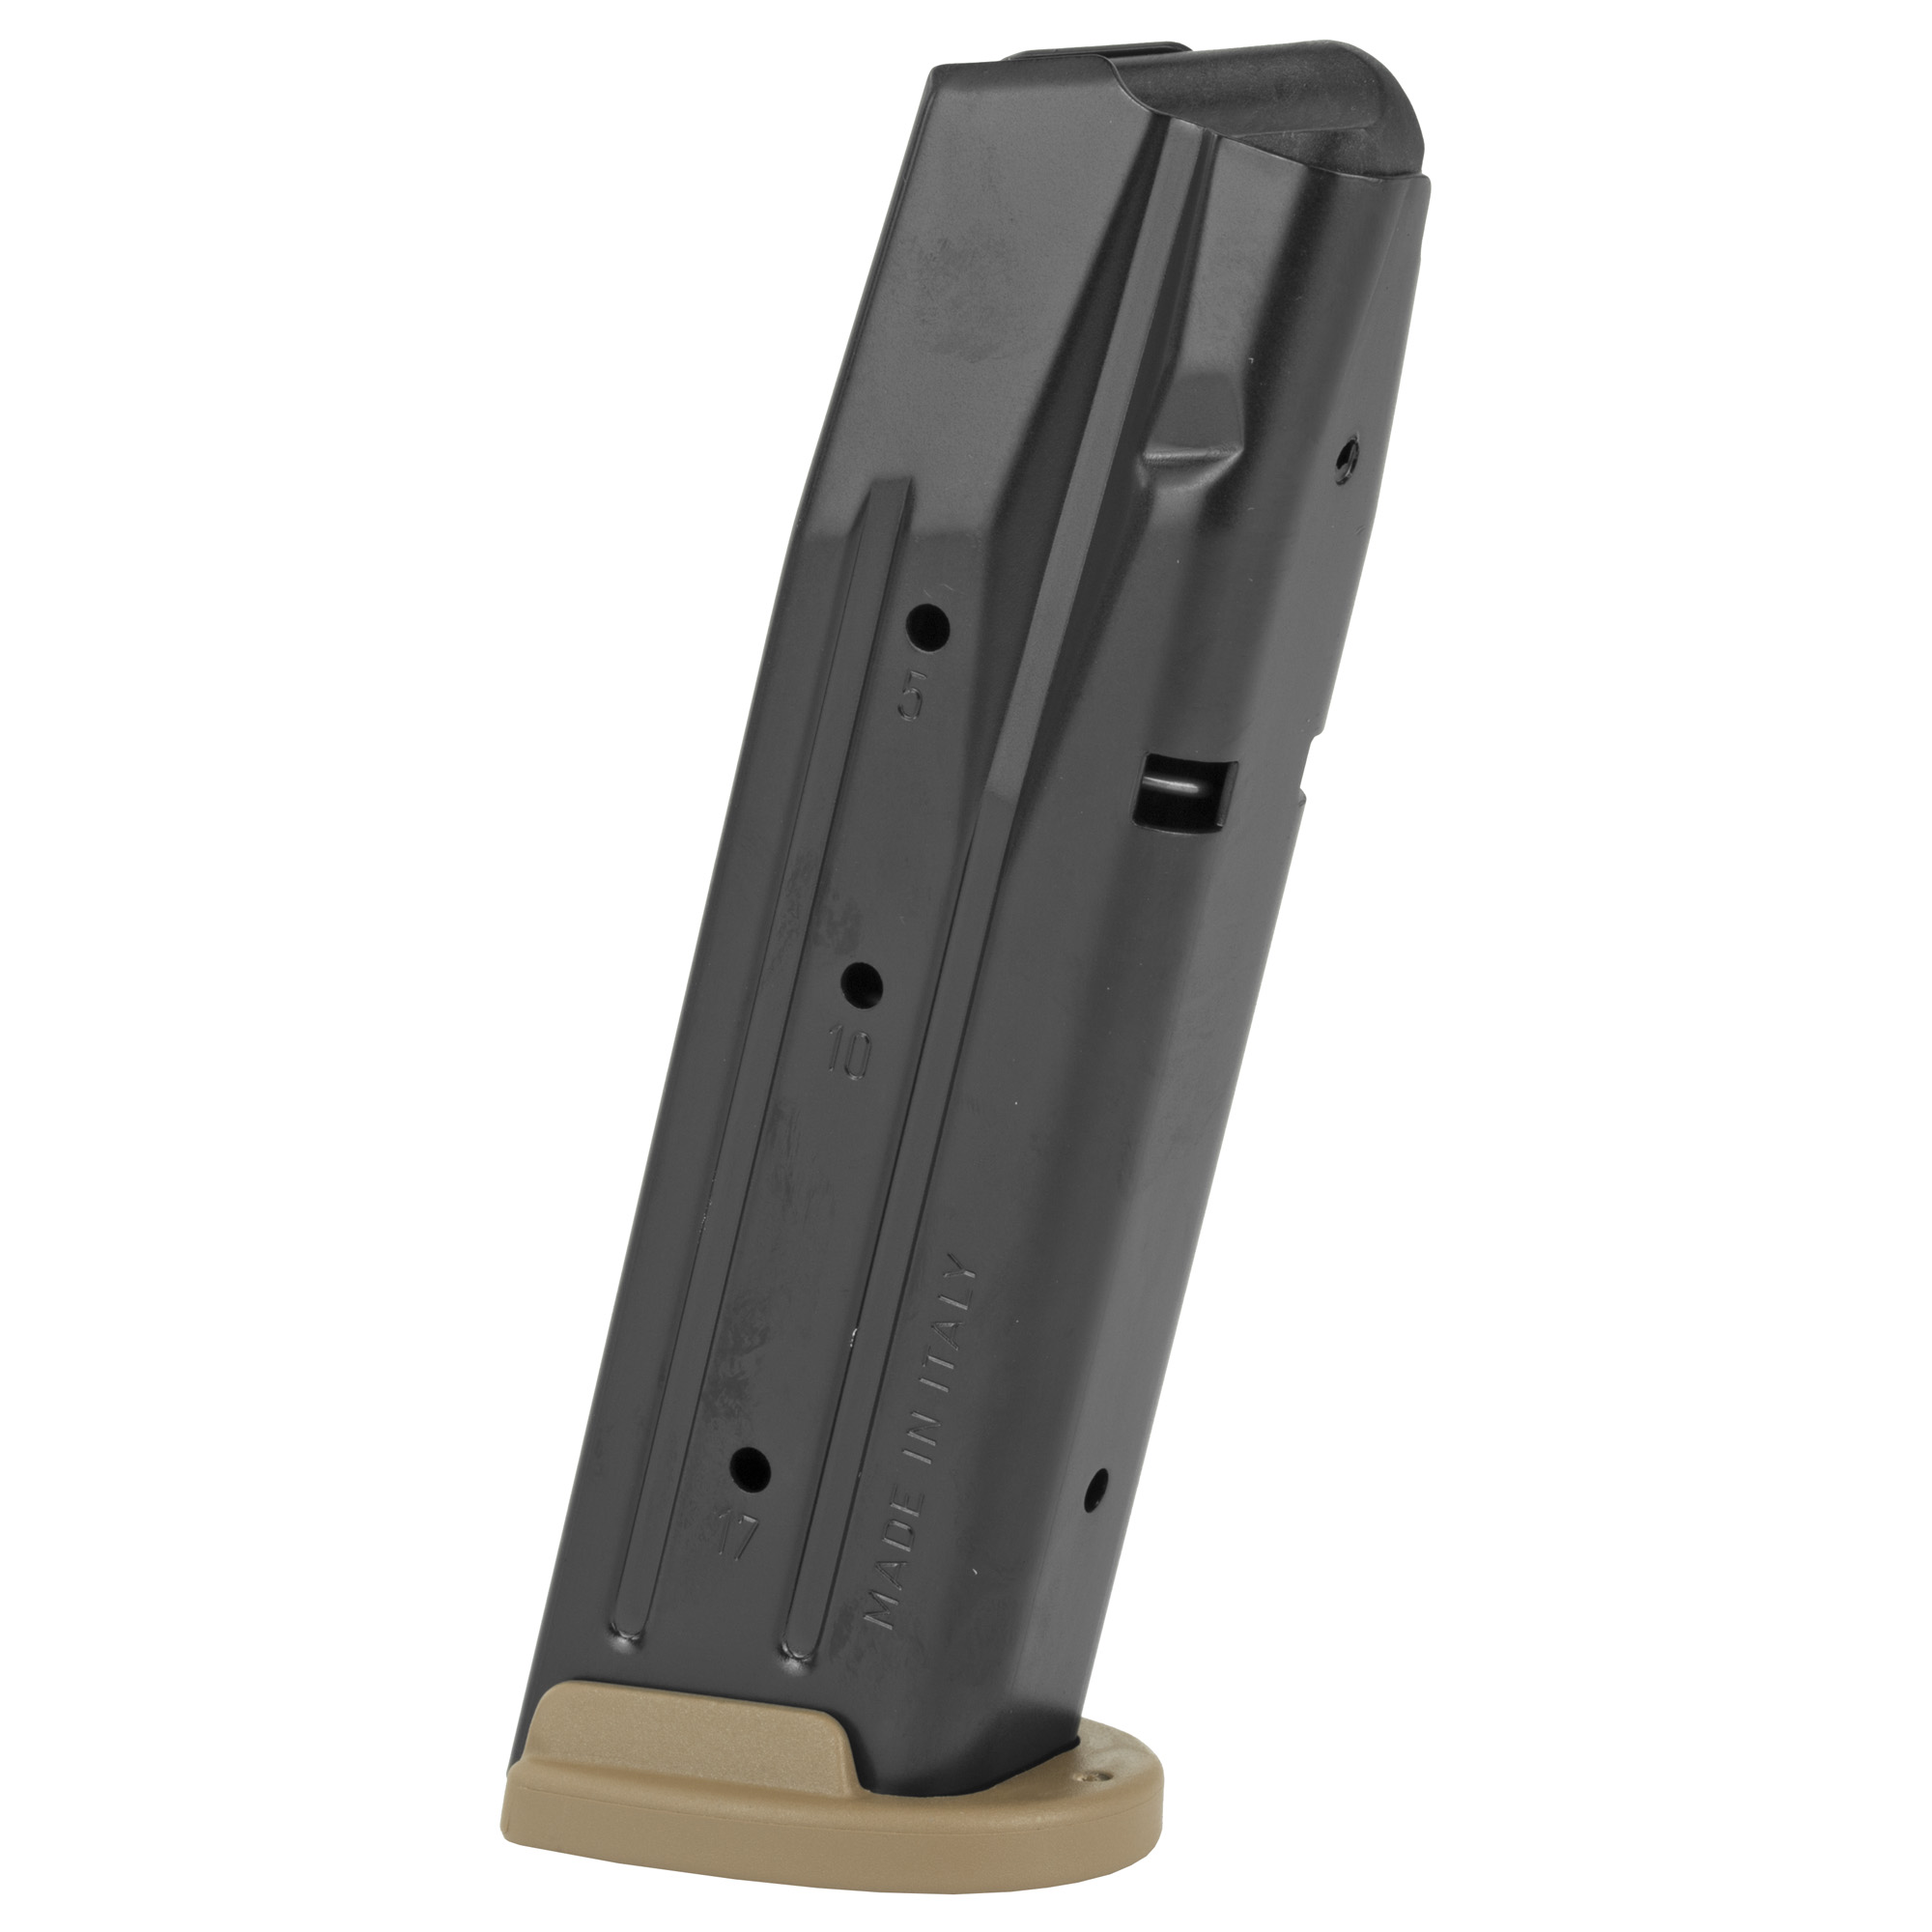 SIG Sauer M17/P320/P250 Full Size 17 Round OEM Magazine, 9mm, Coyote Tan Base Plate,  Black Finish, MPN # MAG-MOD-F-9-17-COY, UP